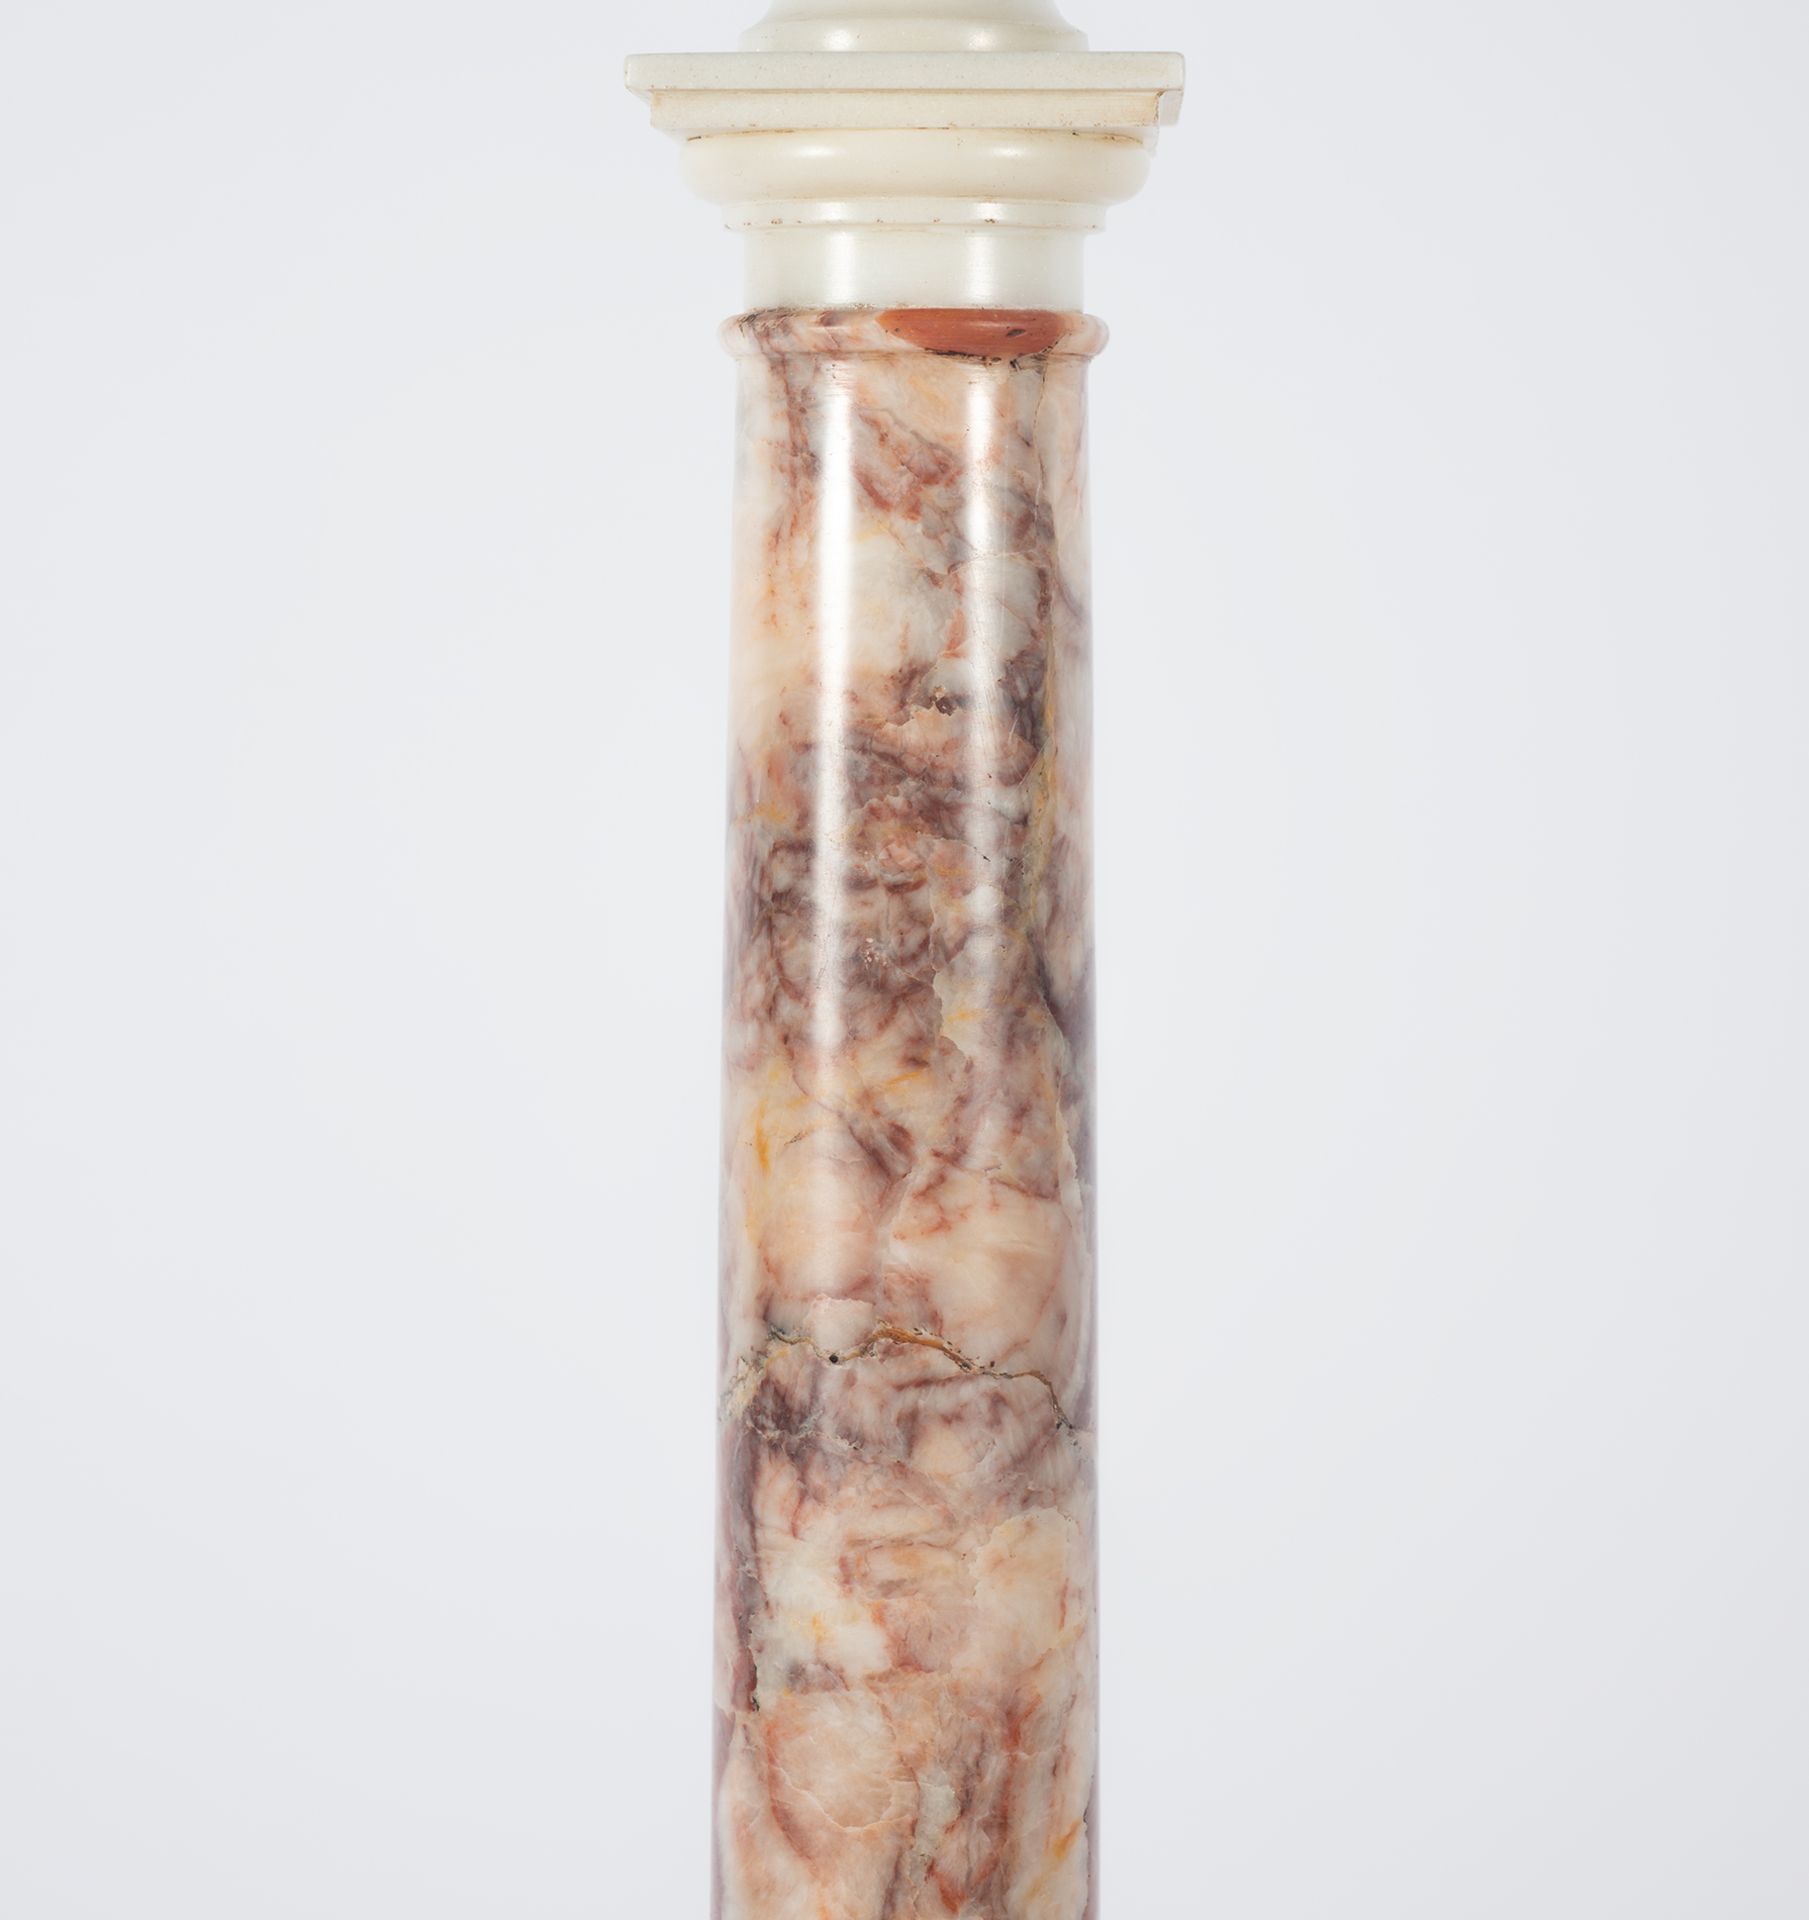 Neoclassicist column in porphyry and alabaster, Italy, 19th - 20th centuries - Image 3 of 4